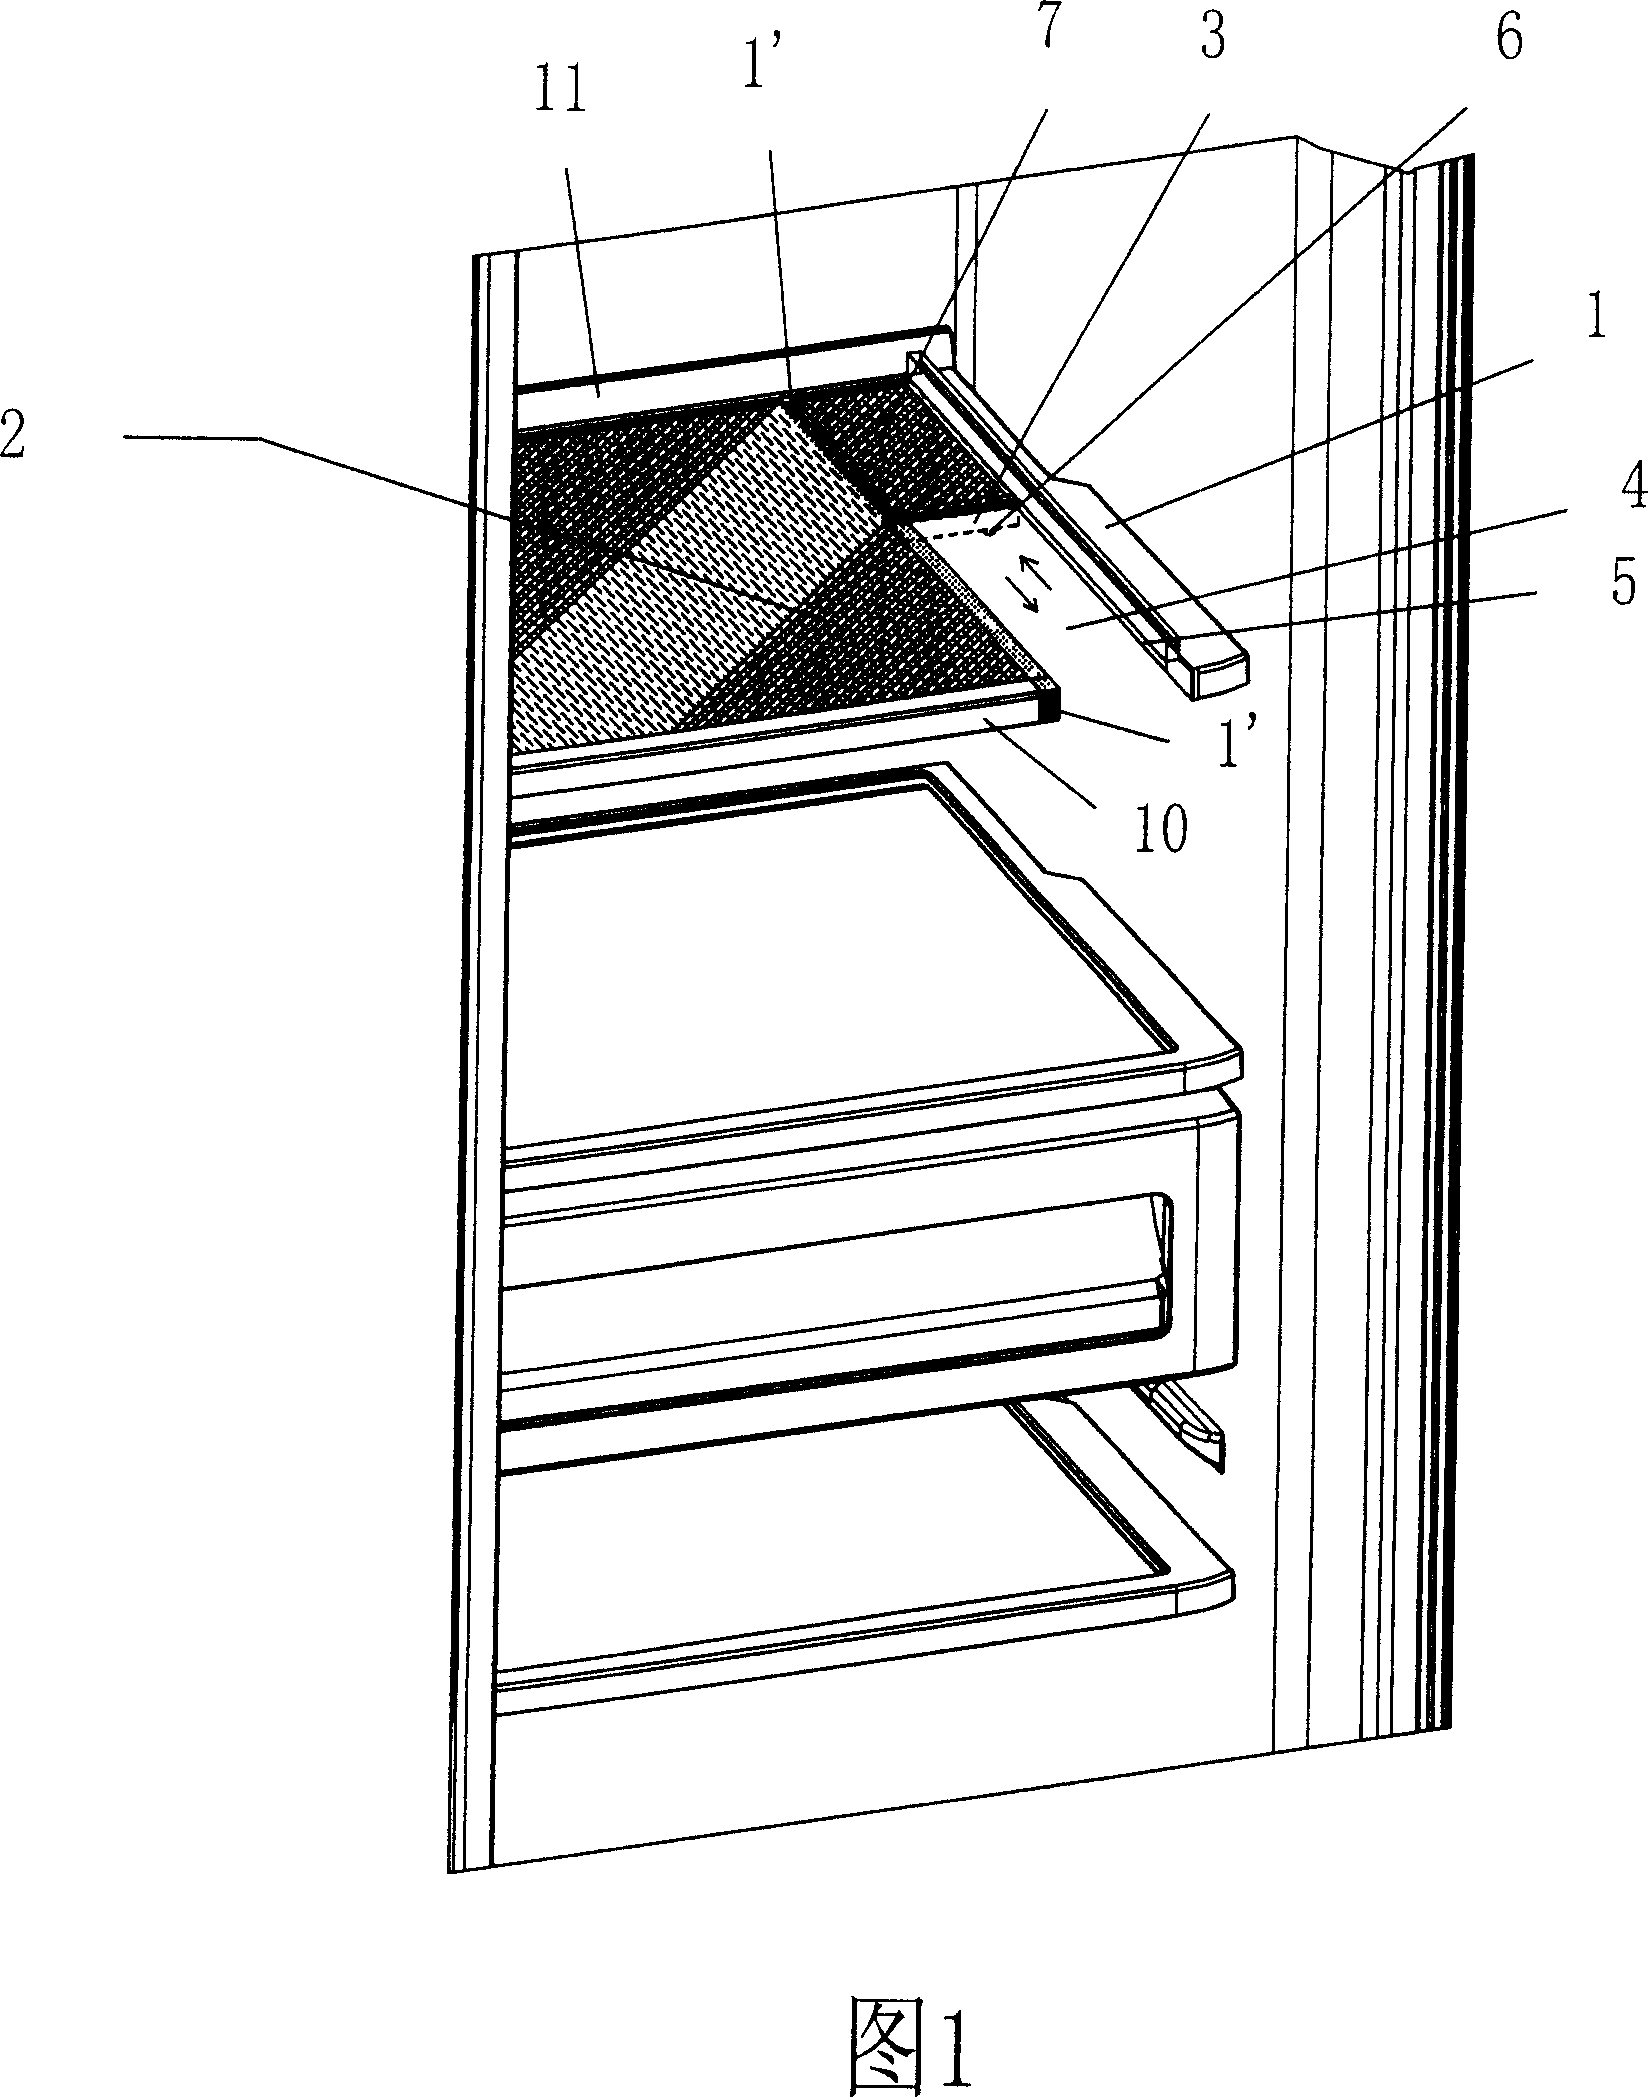 Refrigerator shelves with sliding articles-holding plate locally